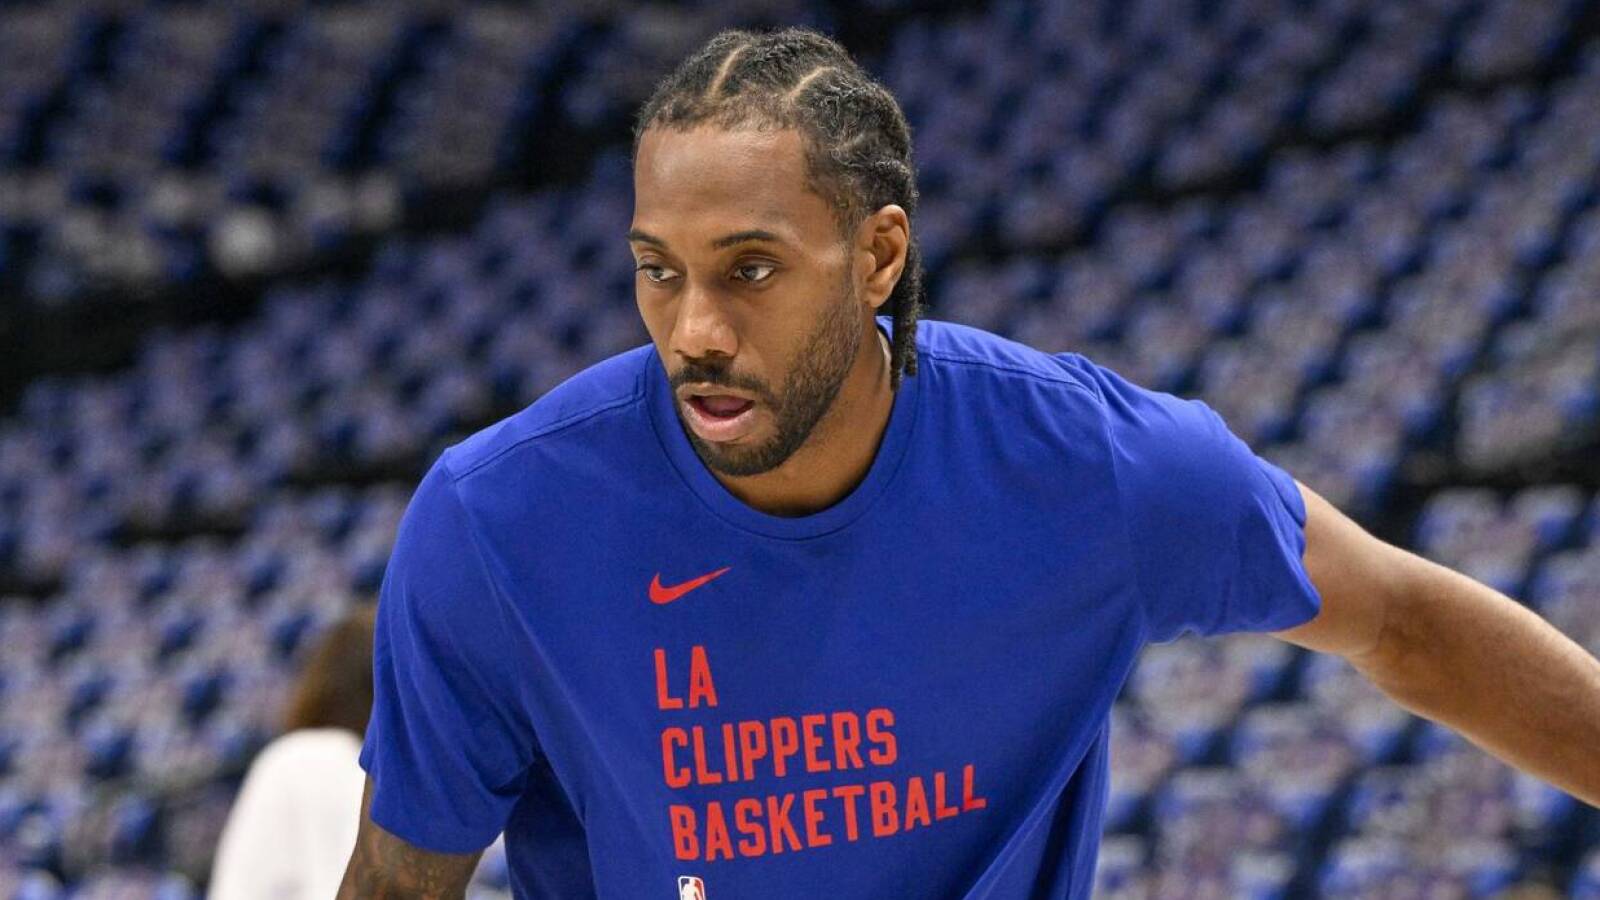 Clippers' Kawhi Leonard to remain out for Game 5